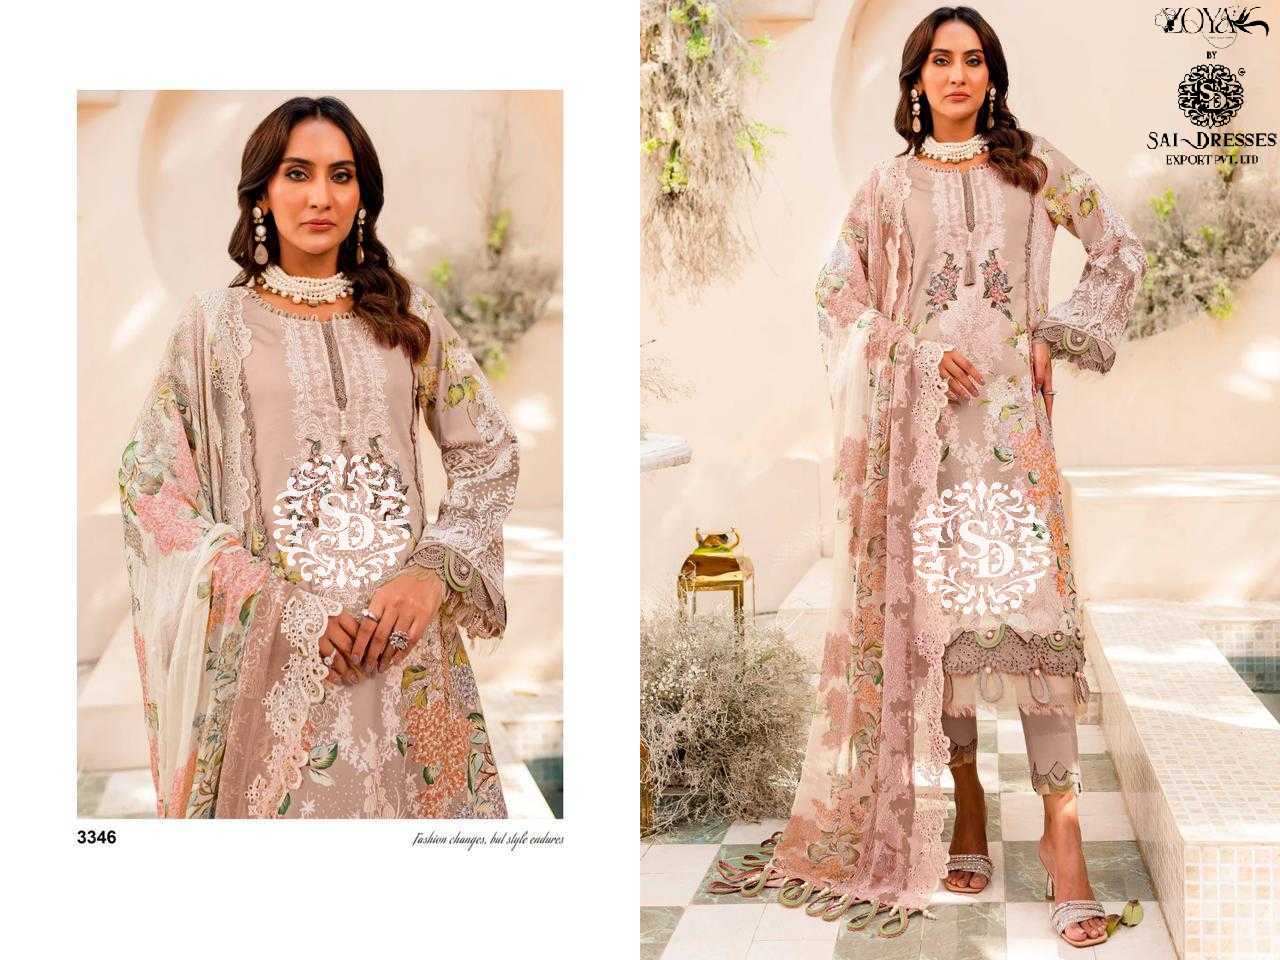 NEEDLE WONDER PREMIUM NX PARTY WEAR PURE COTTON PATCH EMBROIDERED BEAUTIFUL PAKISTANI DESIGNER SALWAR SUITS IN WHOLESALE RATE IN SURAT